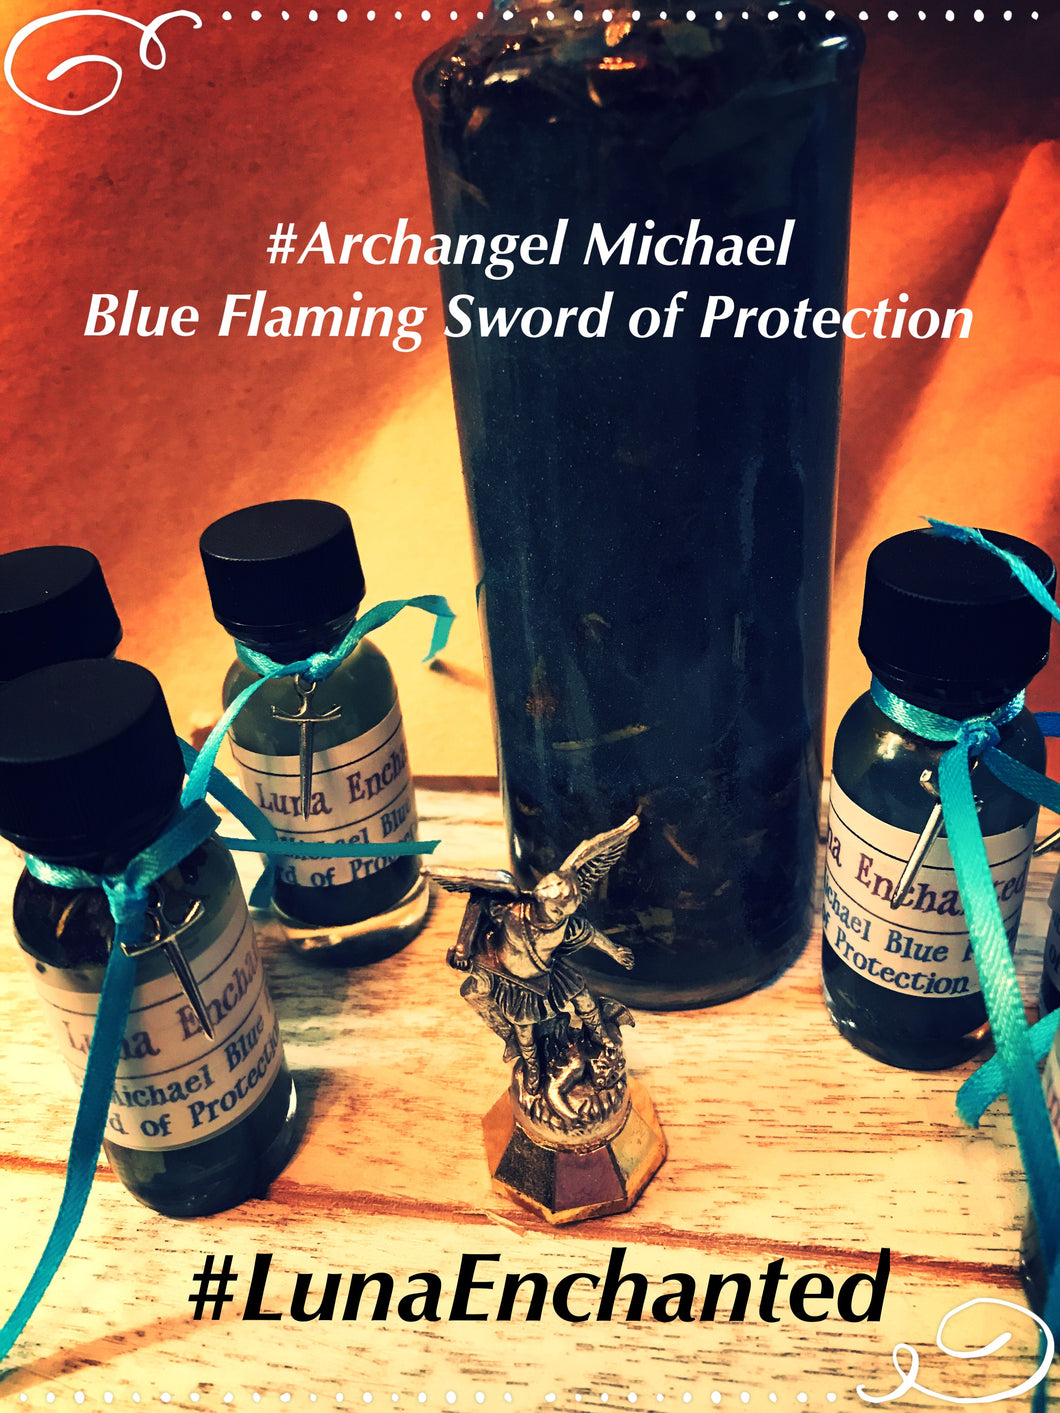 Archangel Michael Blue Flaming Sword of Protection